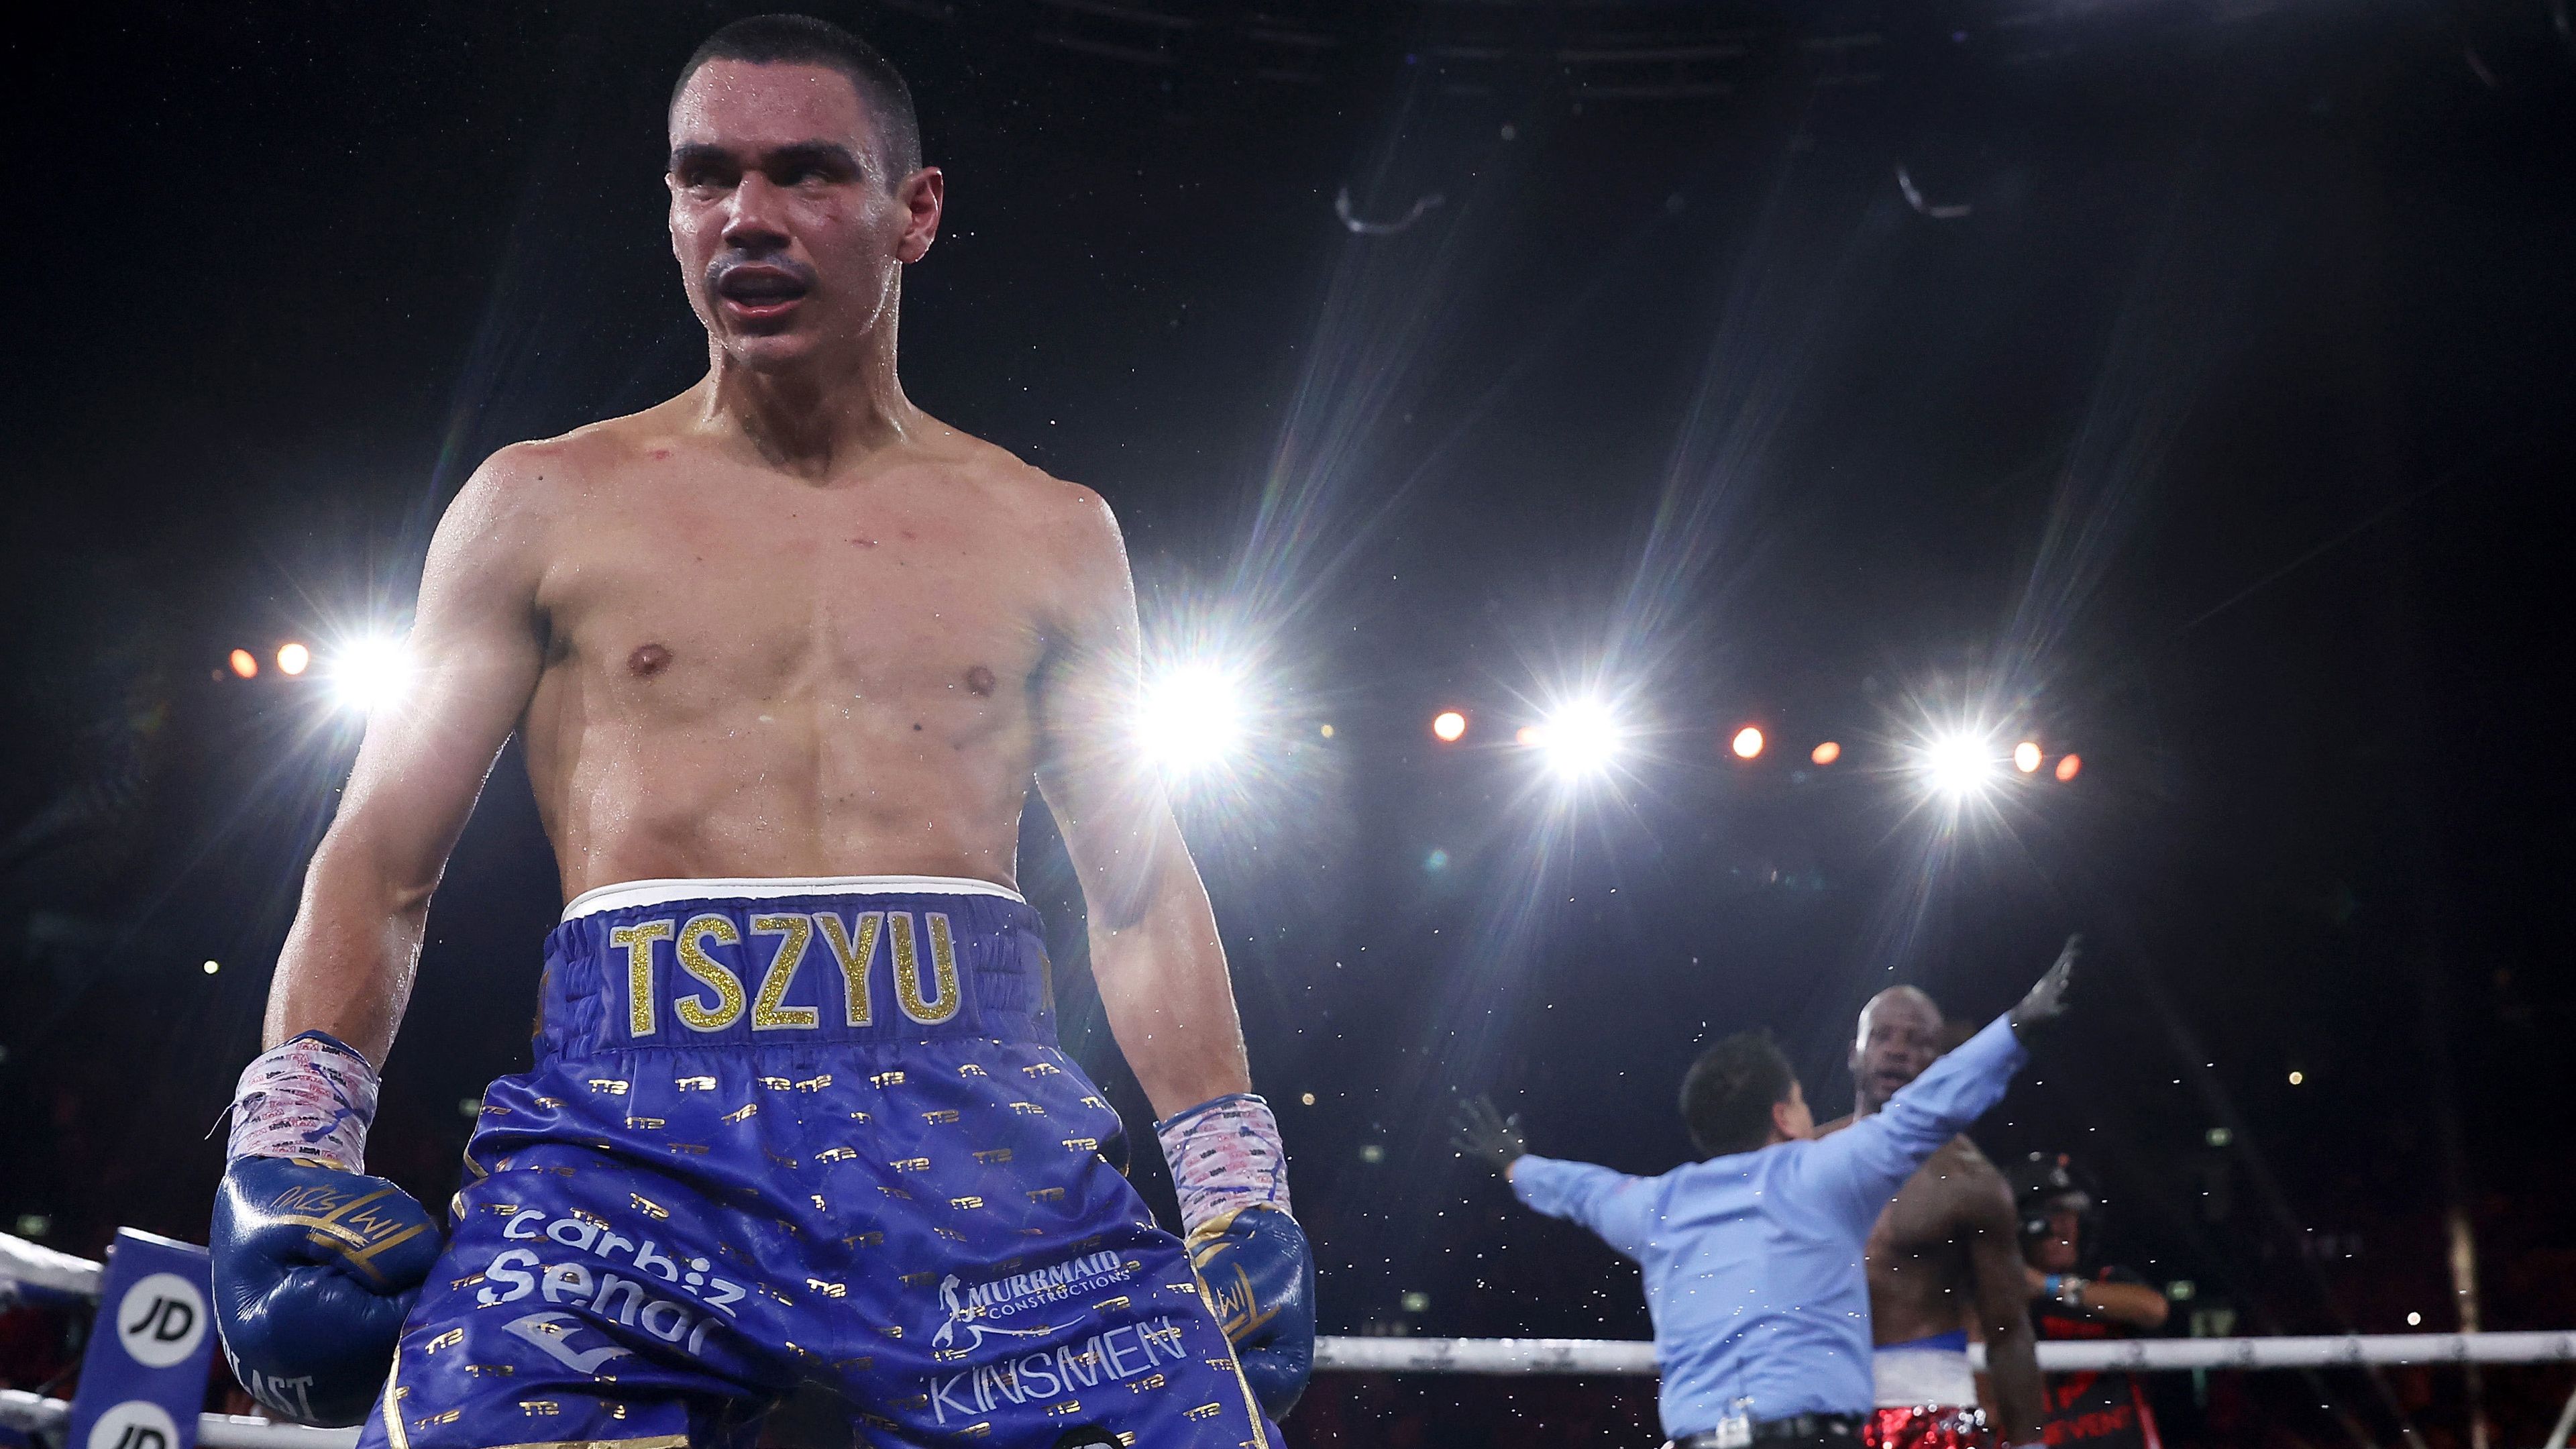 Tim Tszyu celebrates victory in his WBO super-welterweight world title fight against Tony Harrison as the referee signals for the stoppage.